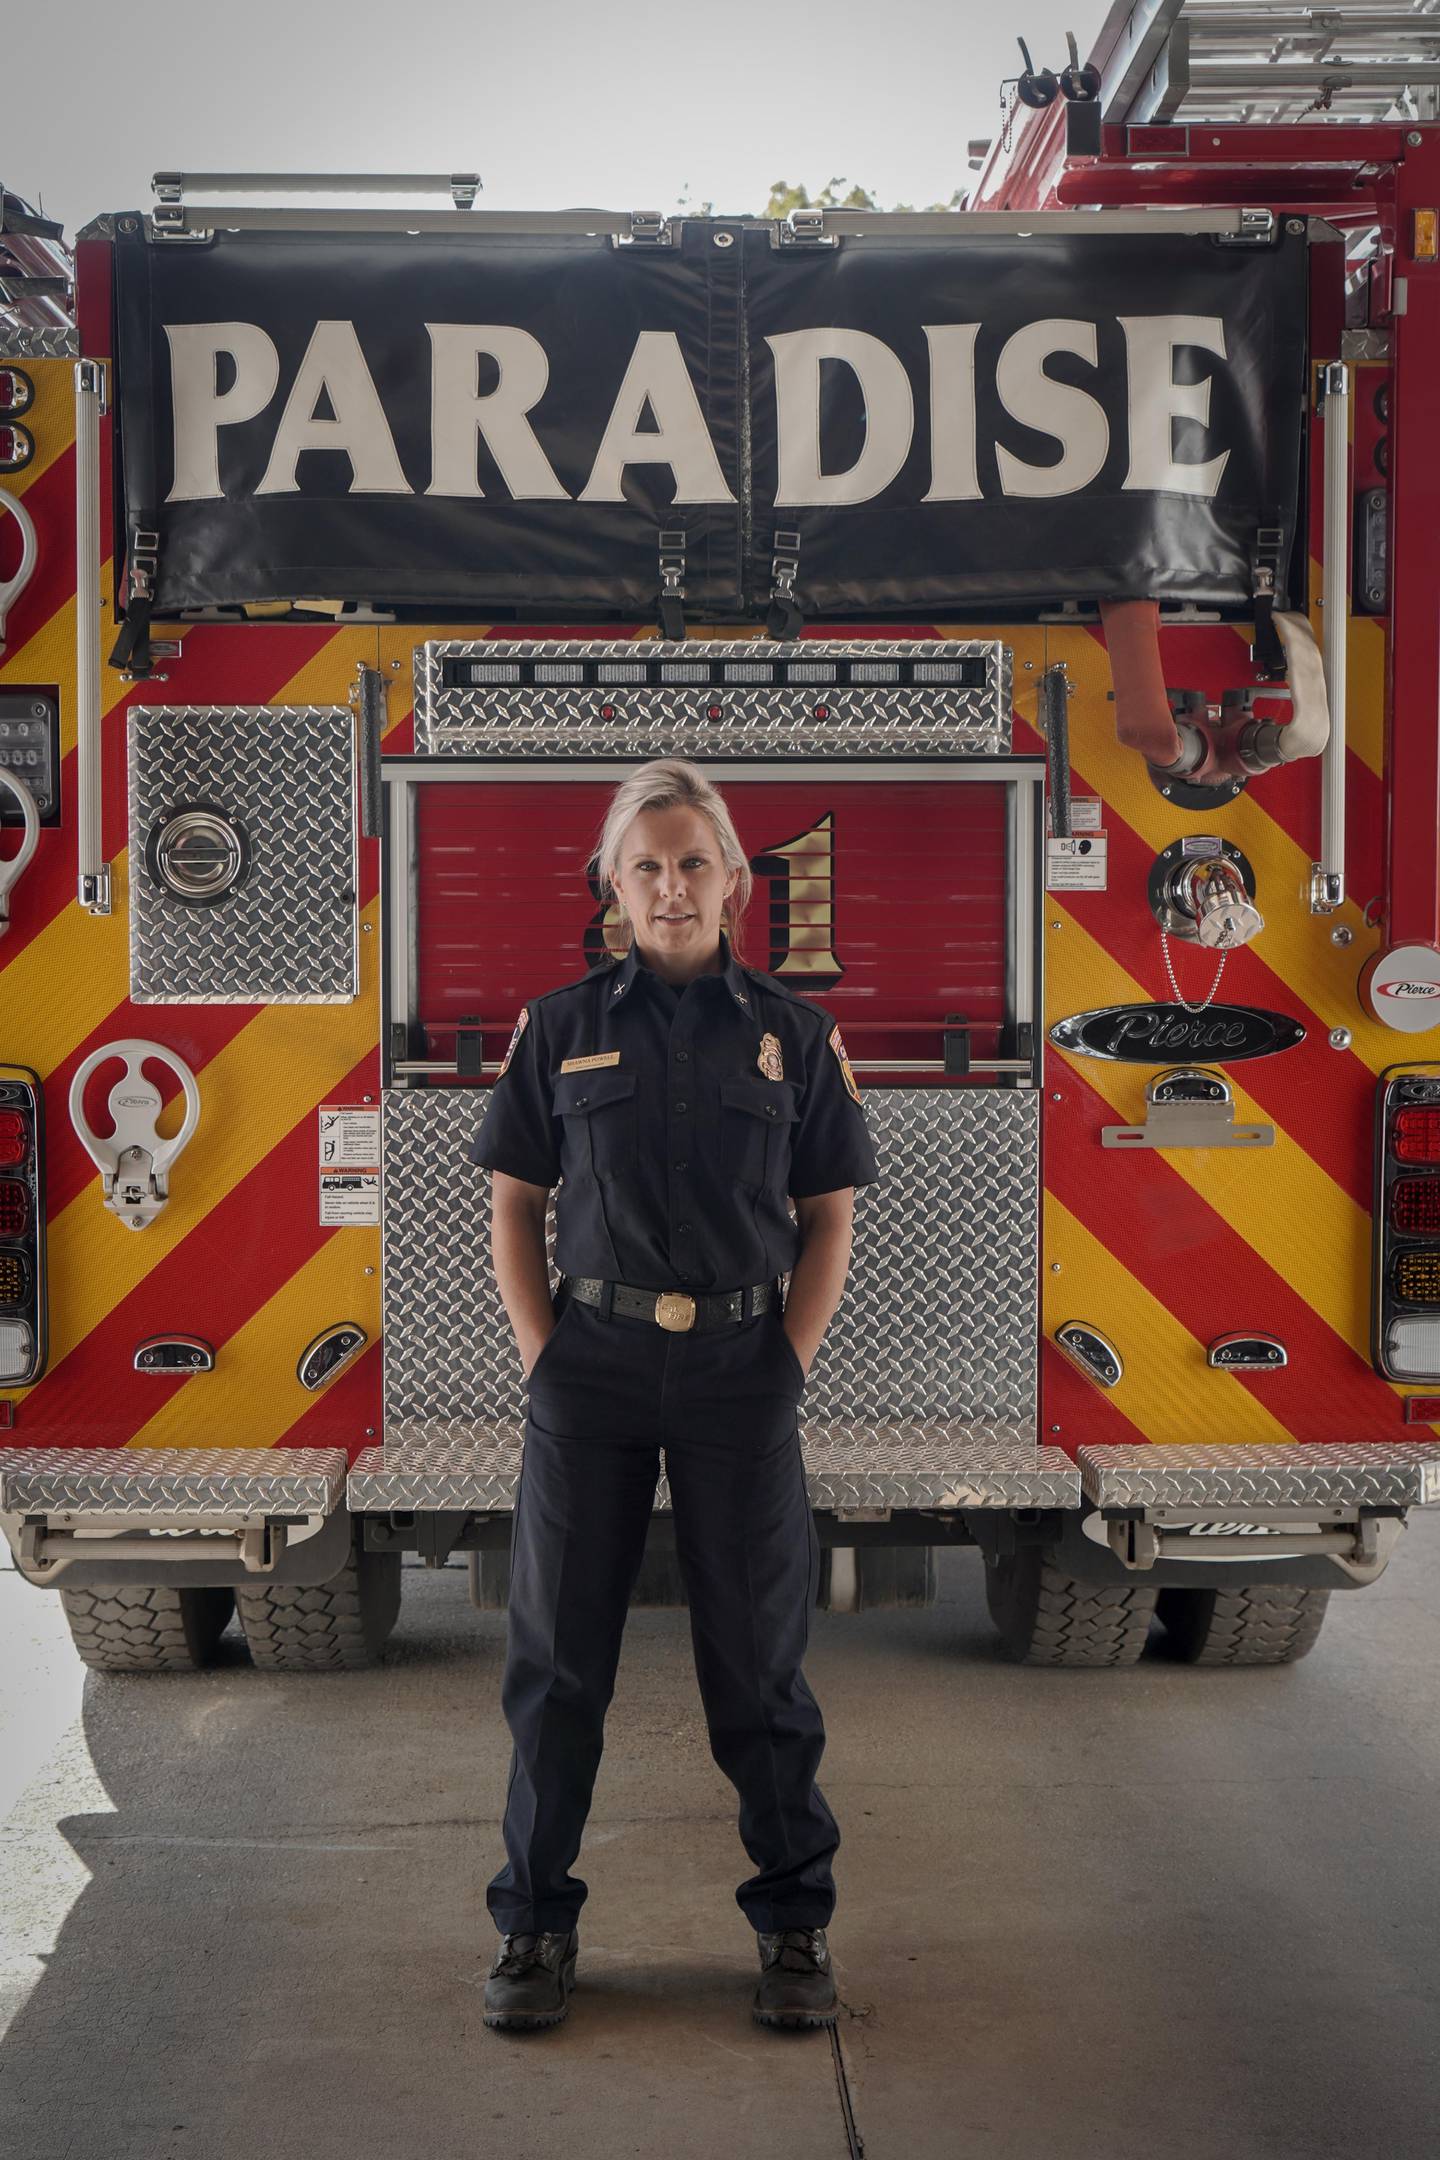 Shawna Powell, Cal Fire Northern Region Peer Support Battalion Chief, stands in front of a Paradise Fire Department fire truck Paradise, CA in REBUILDING PARADISE. (National Geographic/Sarah Soquel Morhaim)